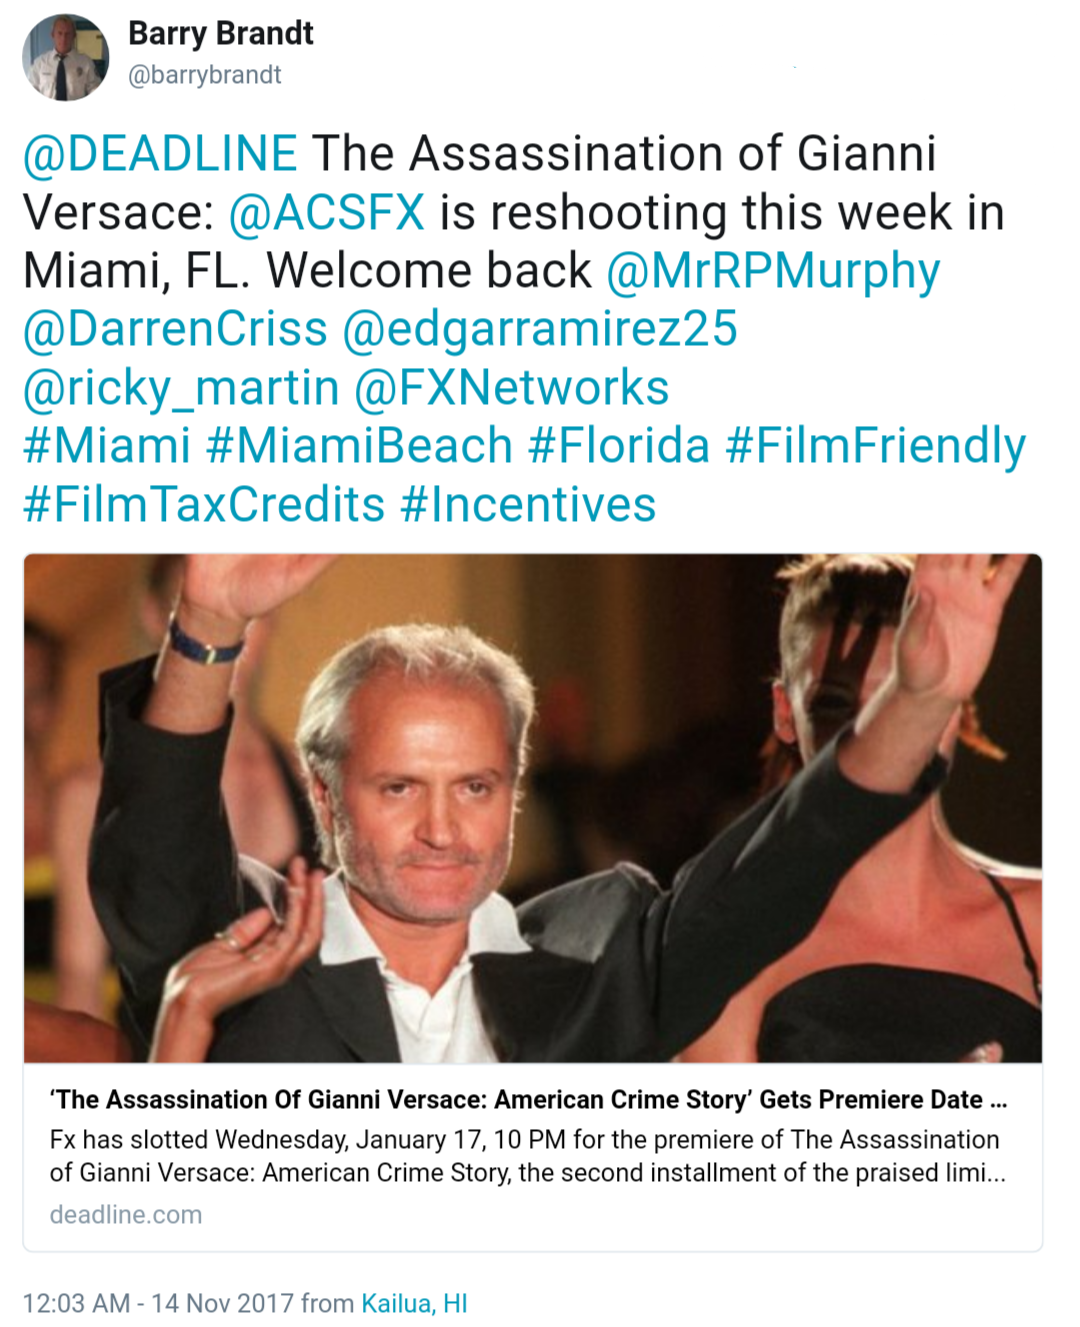 glee - The Assassination of Gianni Versace:  American Crime Story - Page 9 Tumblr_ozfhr8HKHq1wpi2k2o1_1280